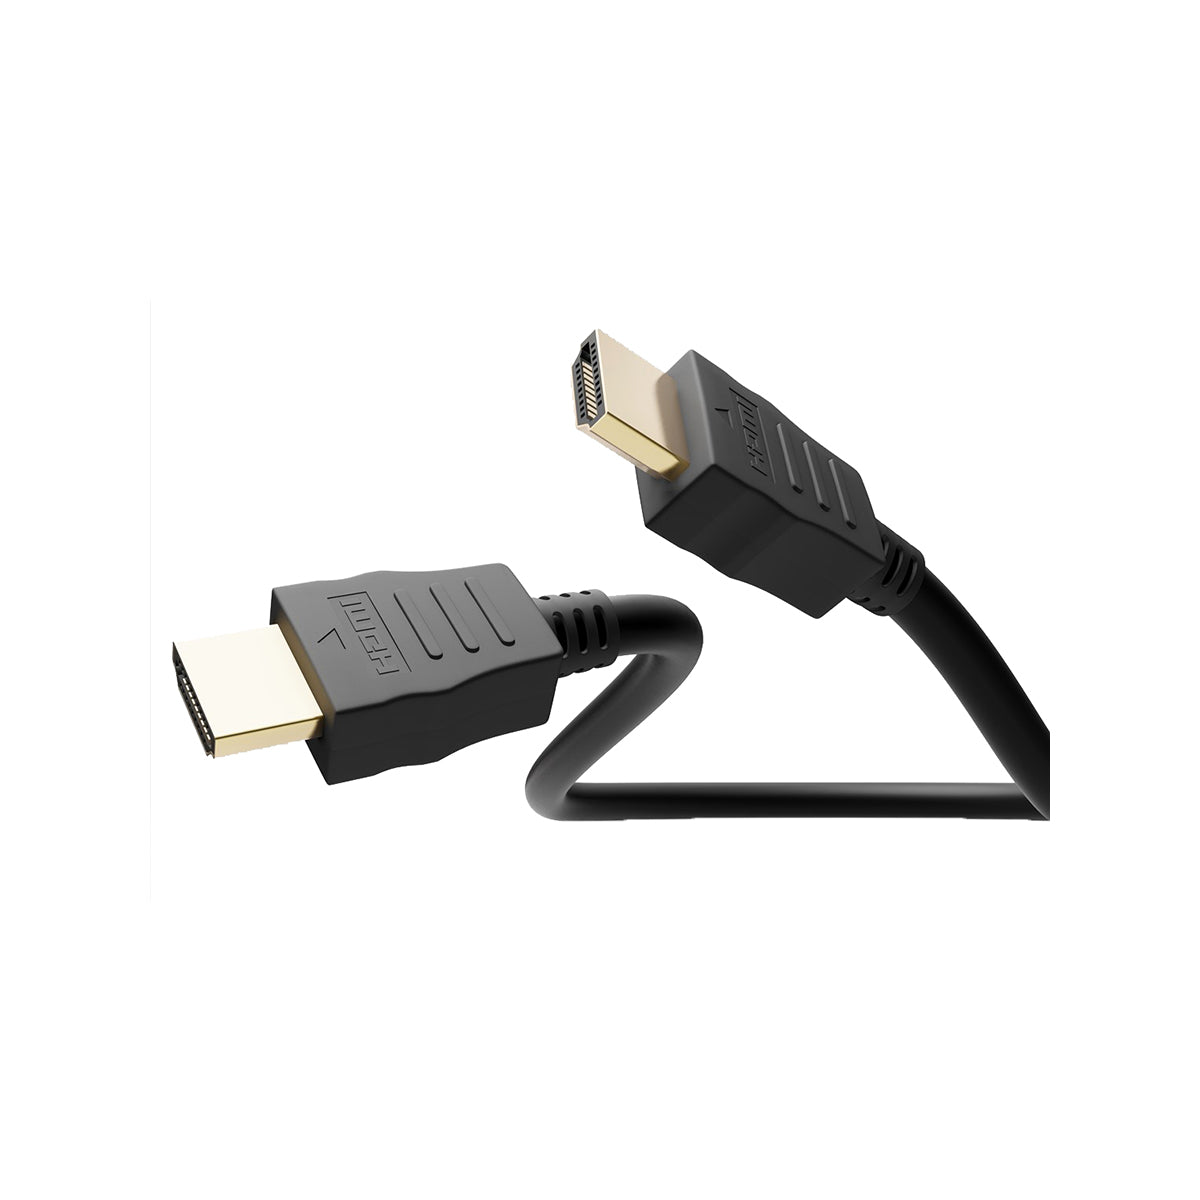 Goobay High Speed HDMI™ Cable with Ethernet (4K@60Hz) 10M for Laptops